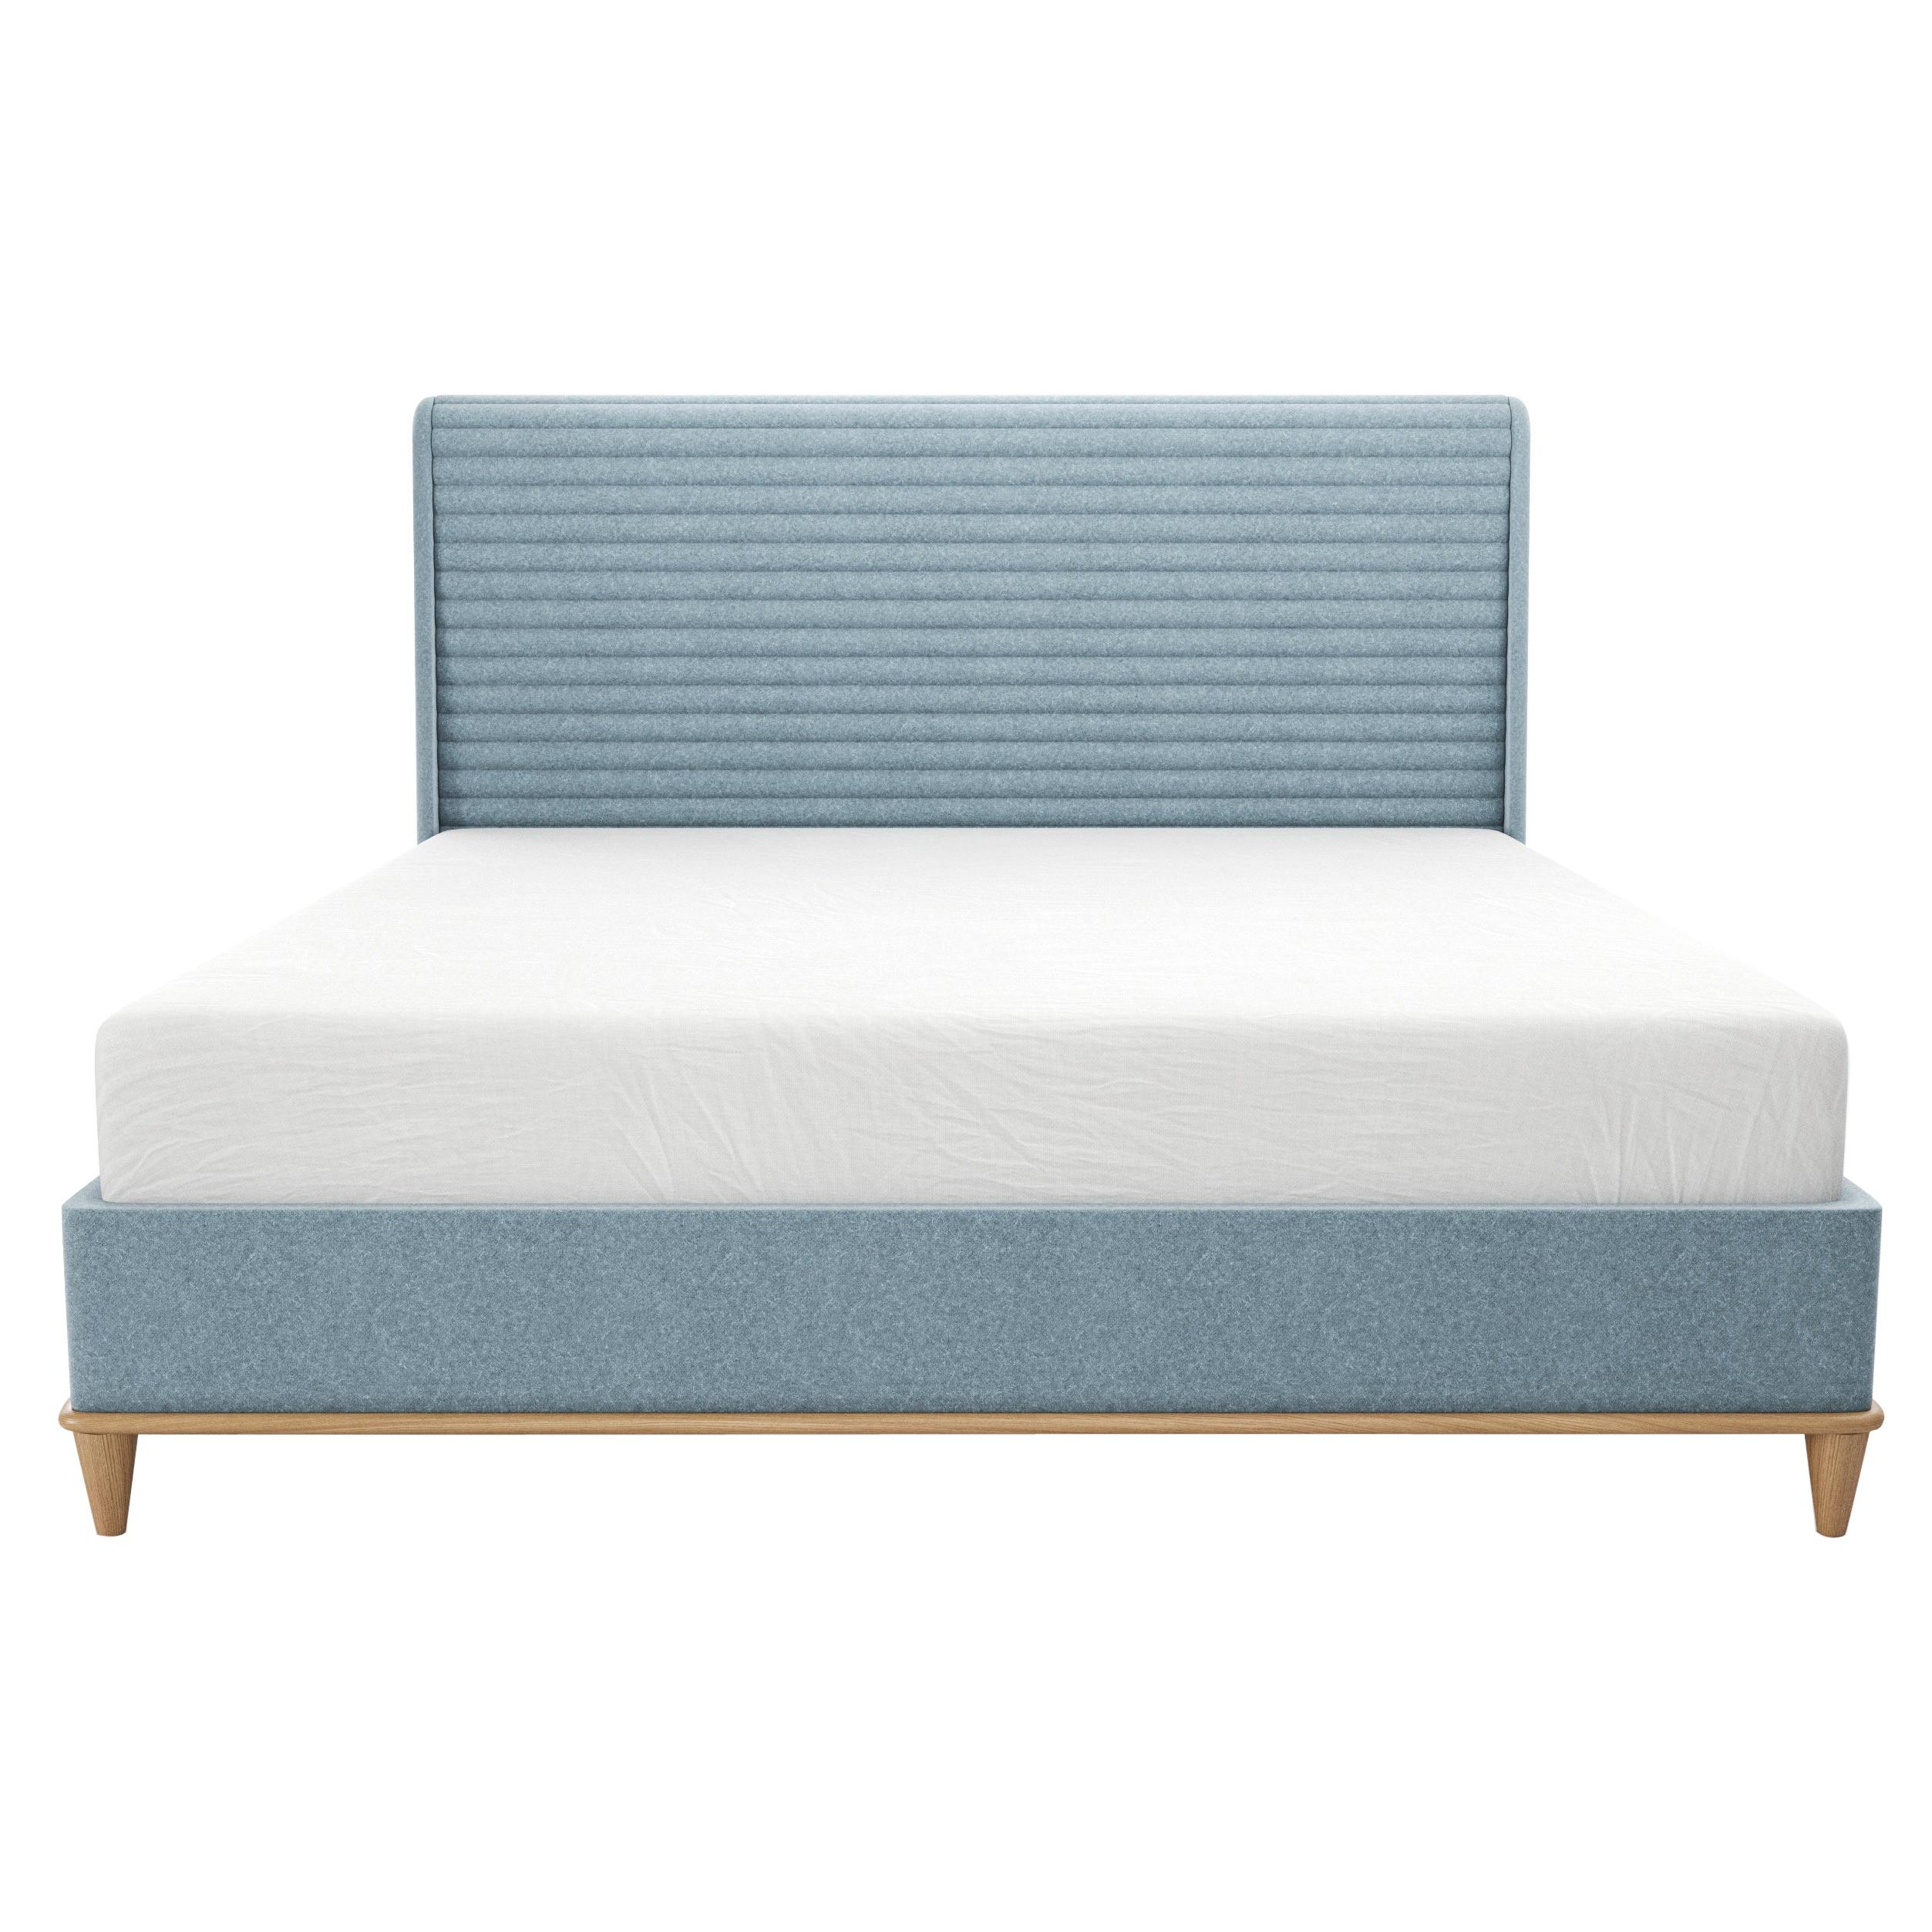 Upholstered Bed with Channeled Headboard and Covered Rails on Wood Base and Legs